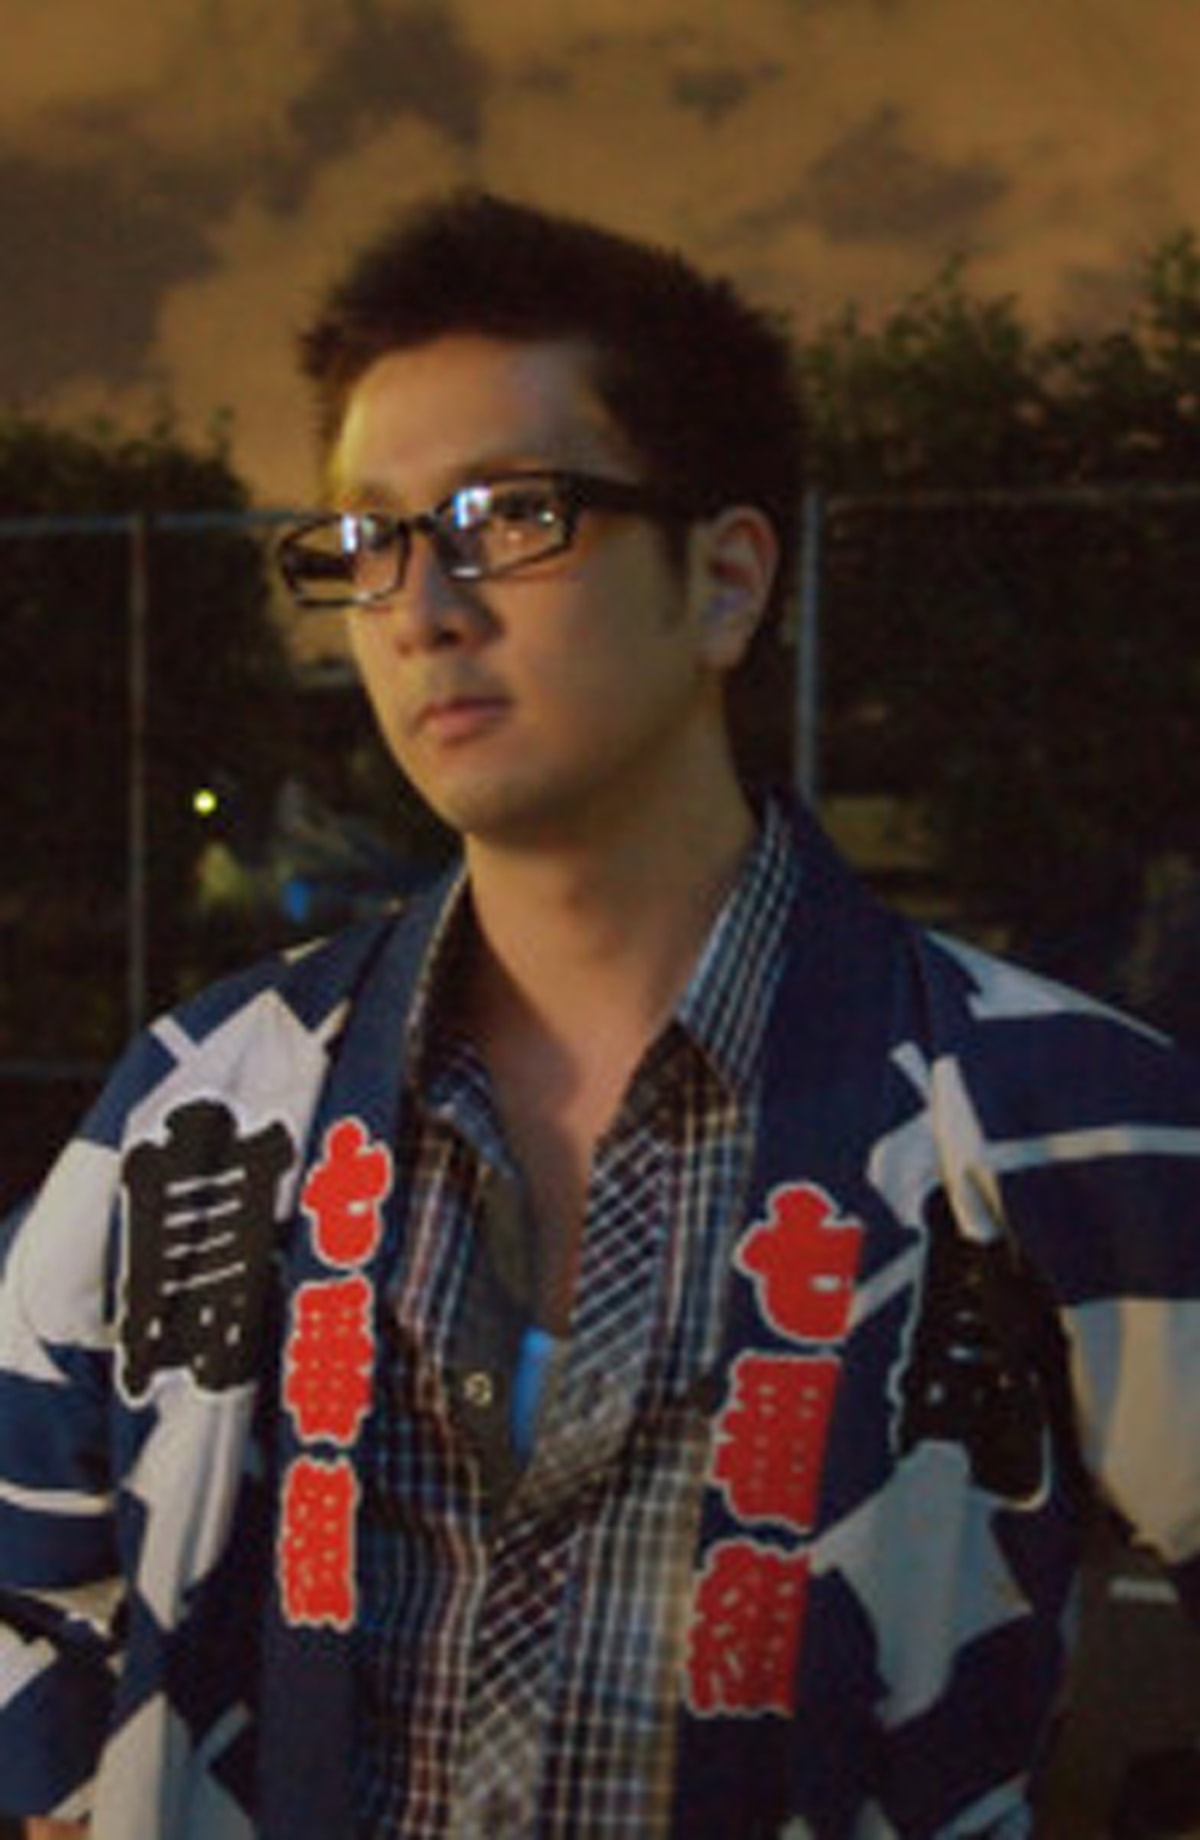 Portrait of DigiPen alumnus Mike Susetyo wearing a jacket with Japanese characters on it